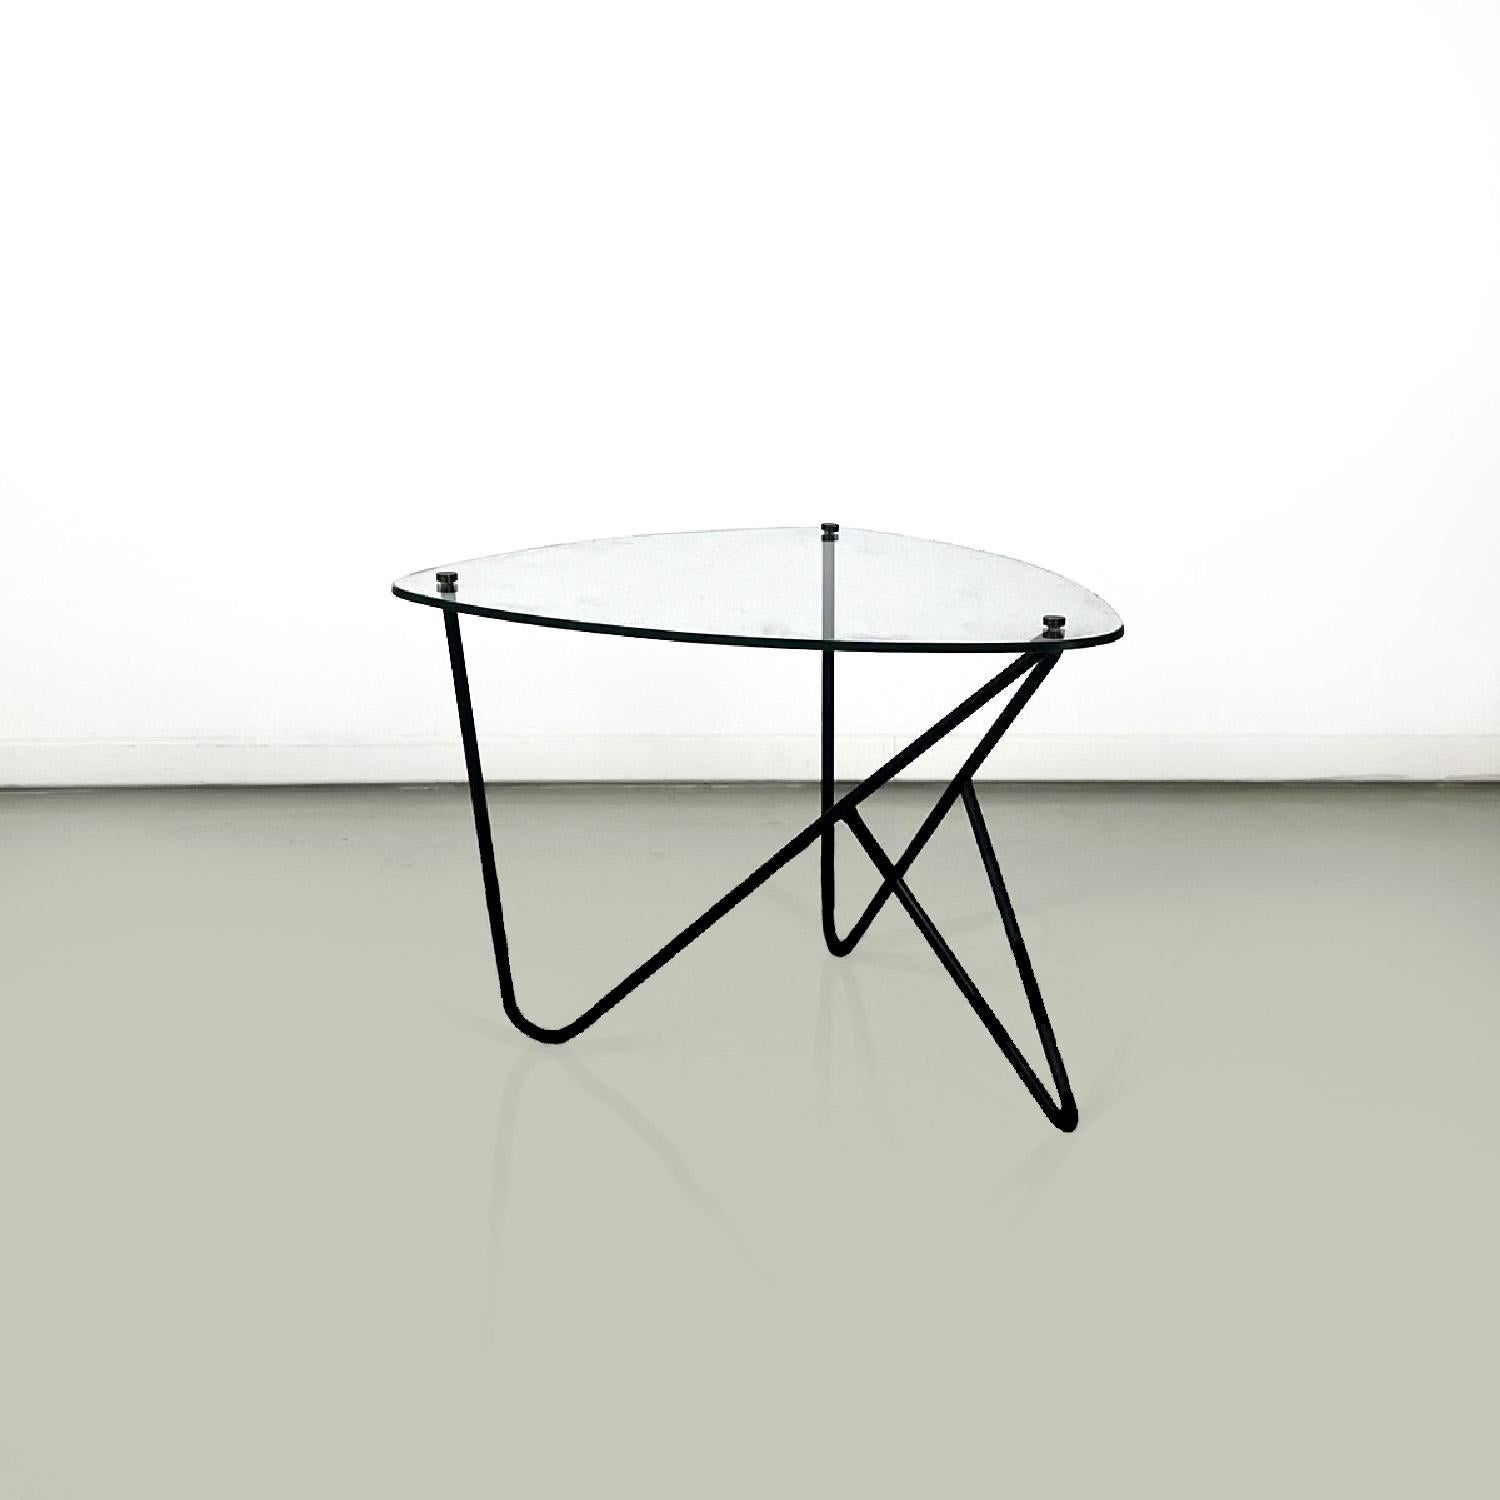 Glass Italian coffee table triangular top glass and black metal structure, 1950s For Sale